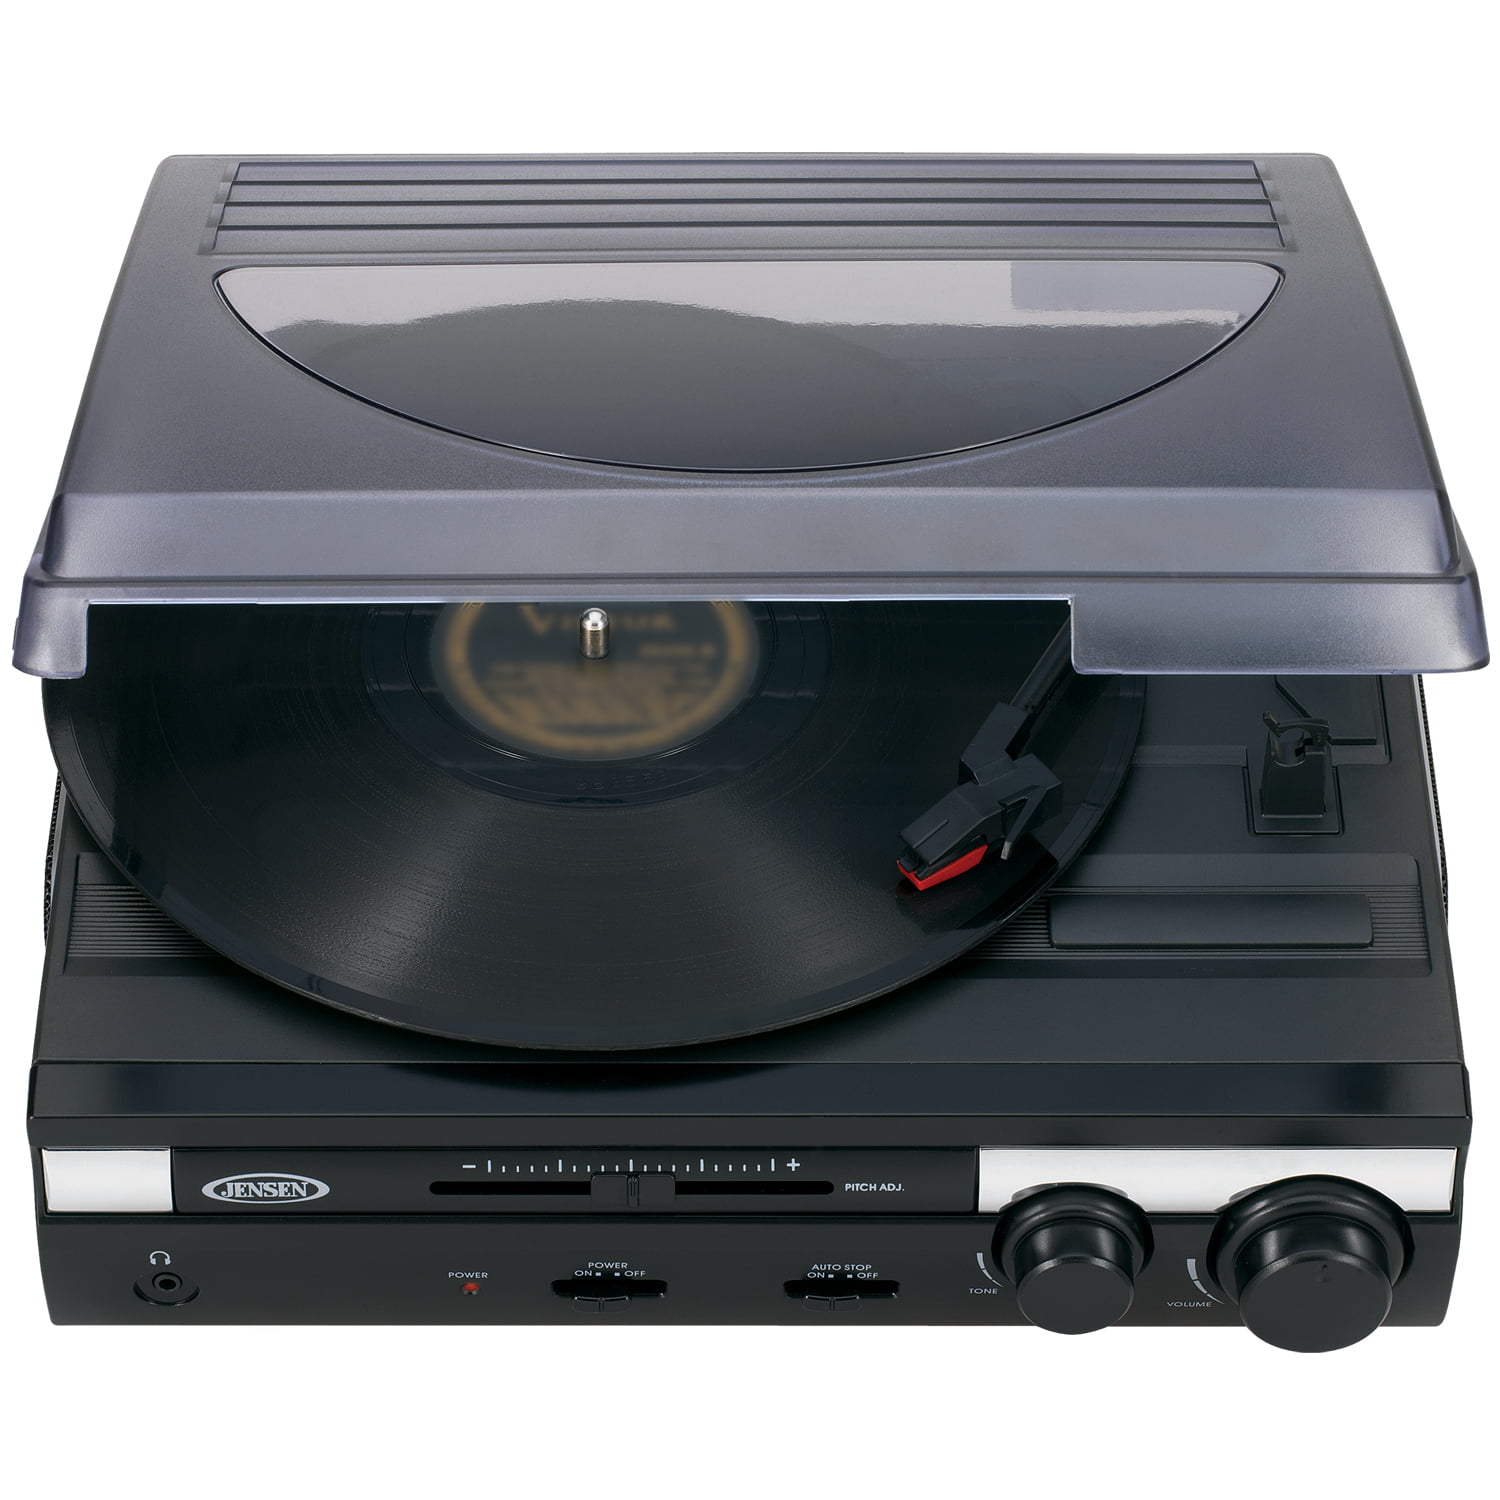 jensen record player with speakers